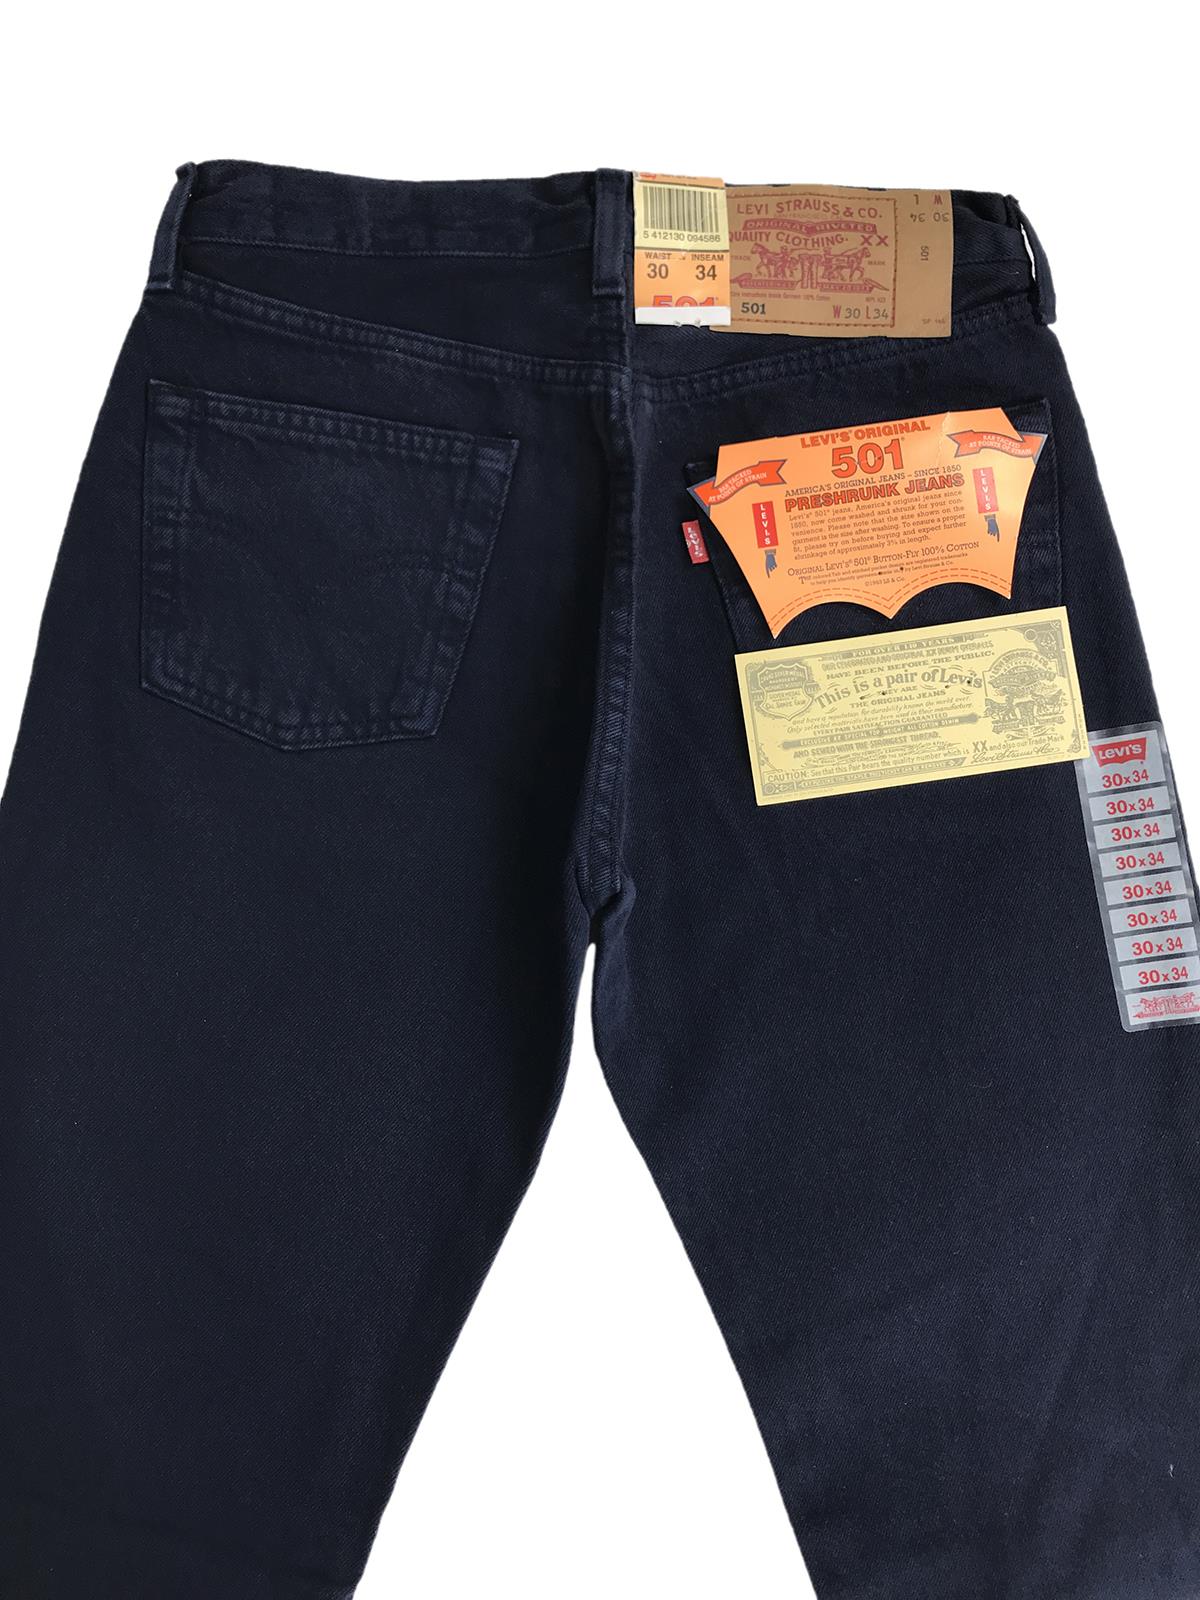 LEVI'S 501 Dyed Jeans